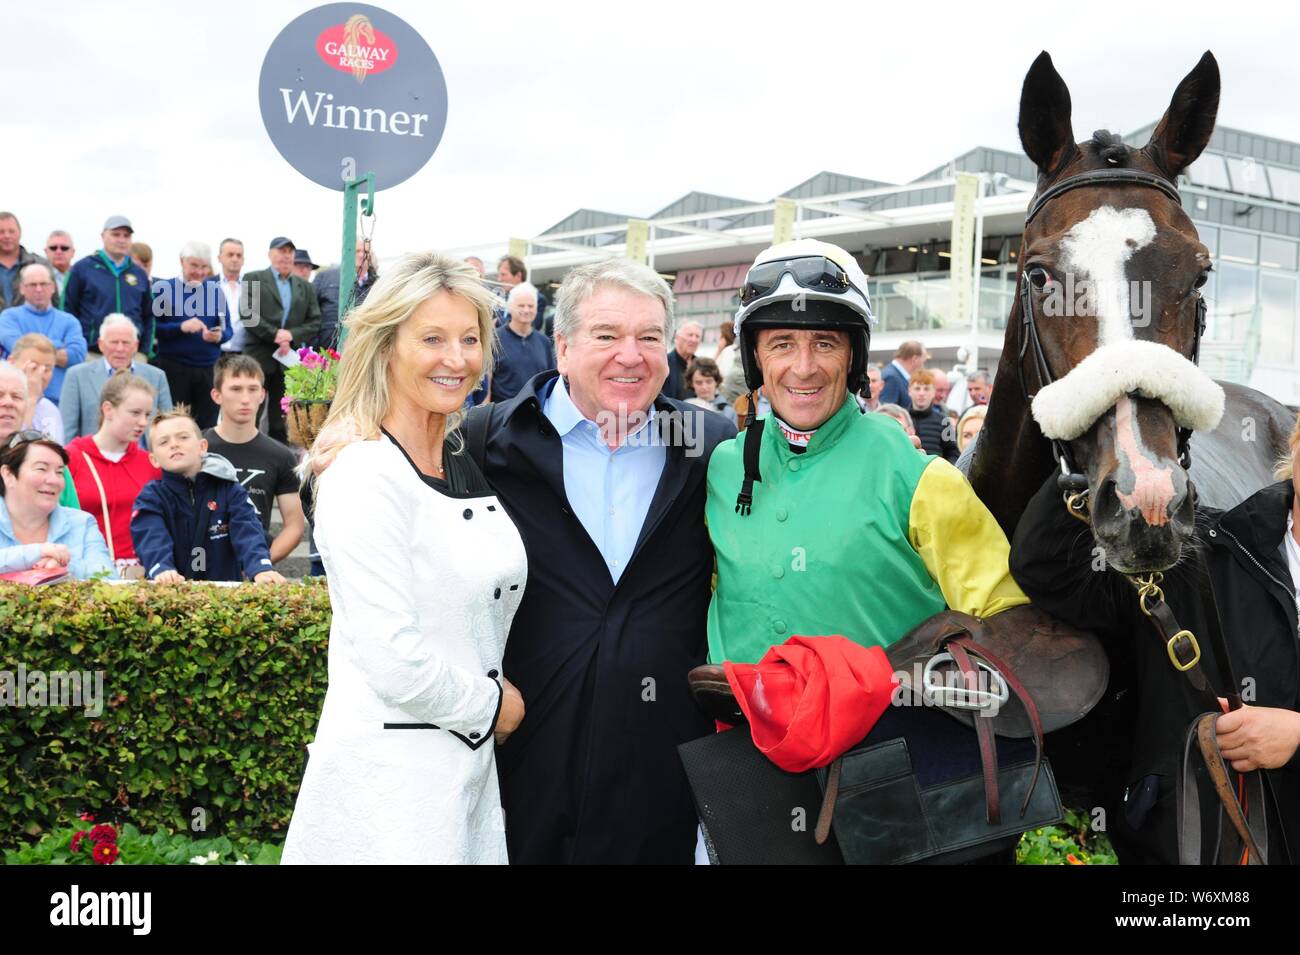 Jockey Davy Russell with owners John & Debbie Breslin after winning the O'Leary Insurances Maiden Hurdle onboard Mr Everest during day six of the 2019 Summer Festival at Galway Racecourse. Stock Photo